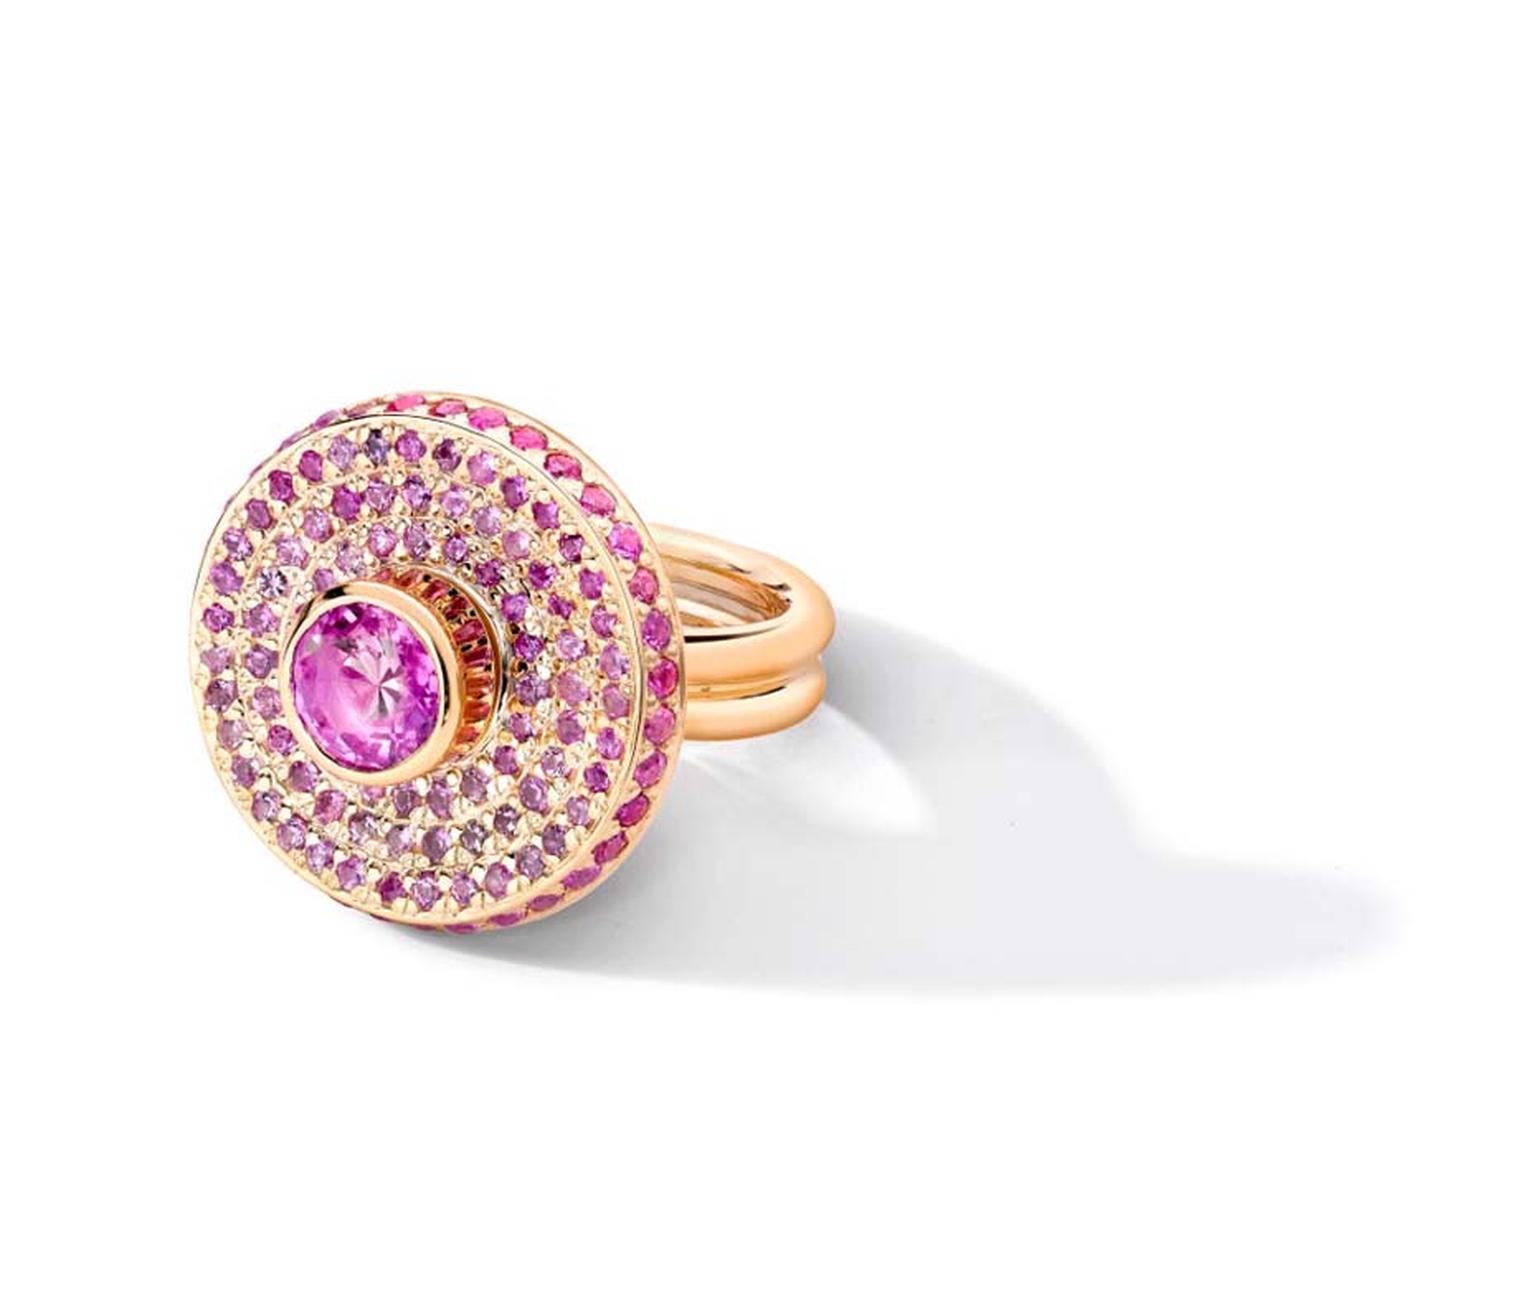 Powder Hill Pink Powder Spinning ring in rose gold with sapphires